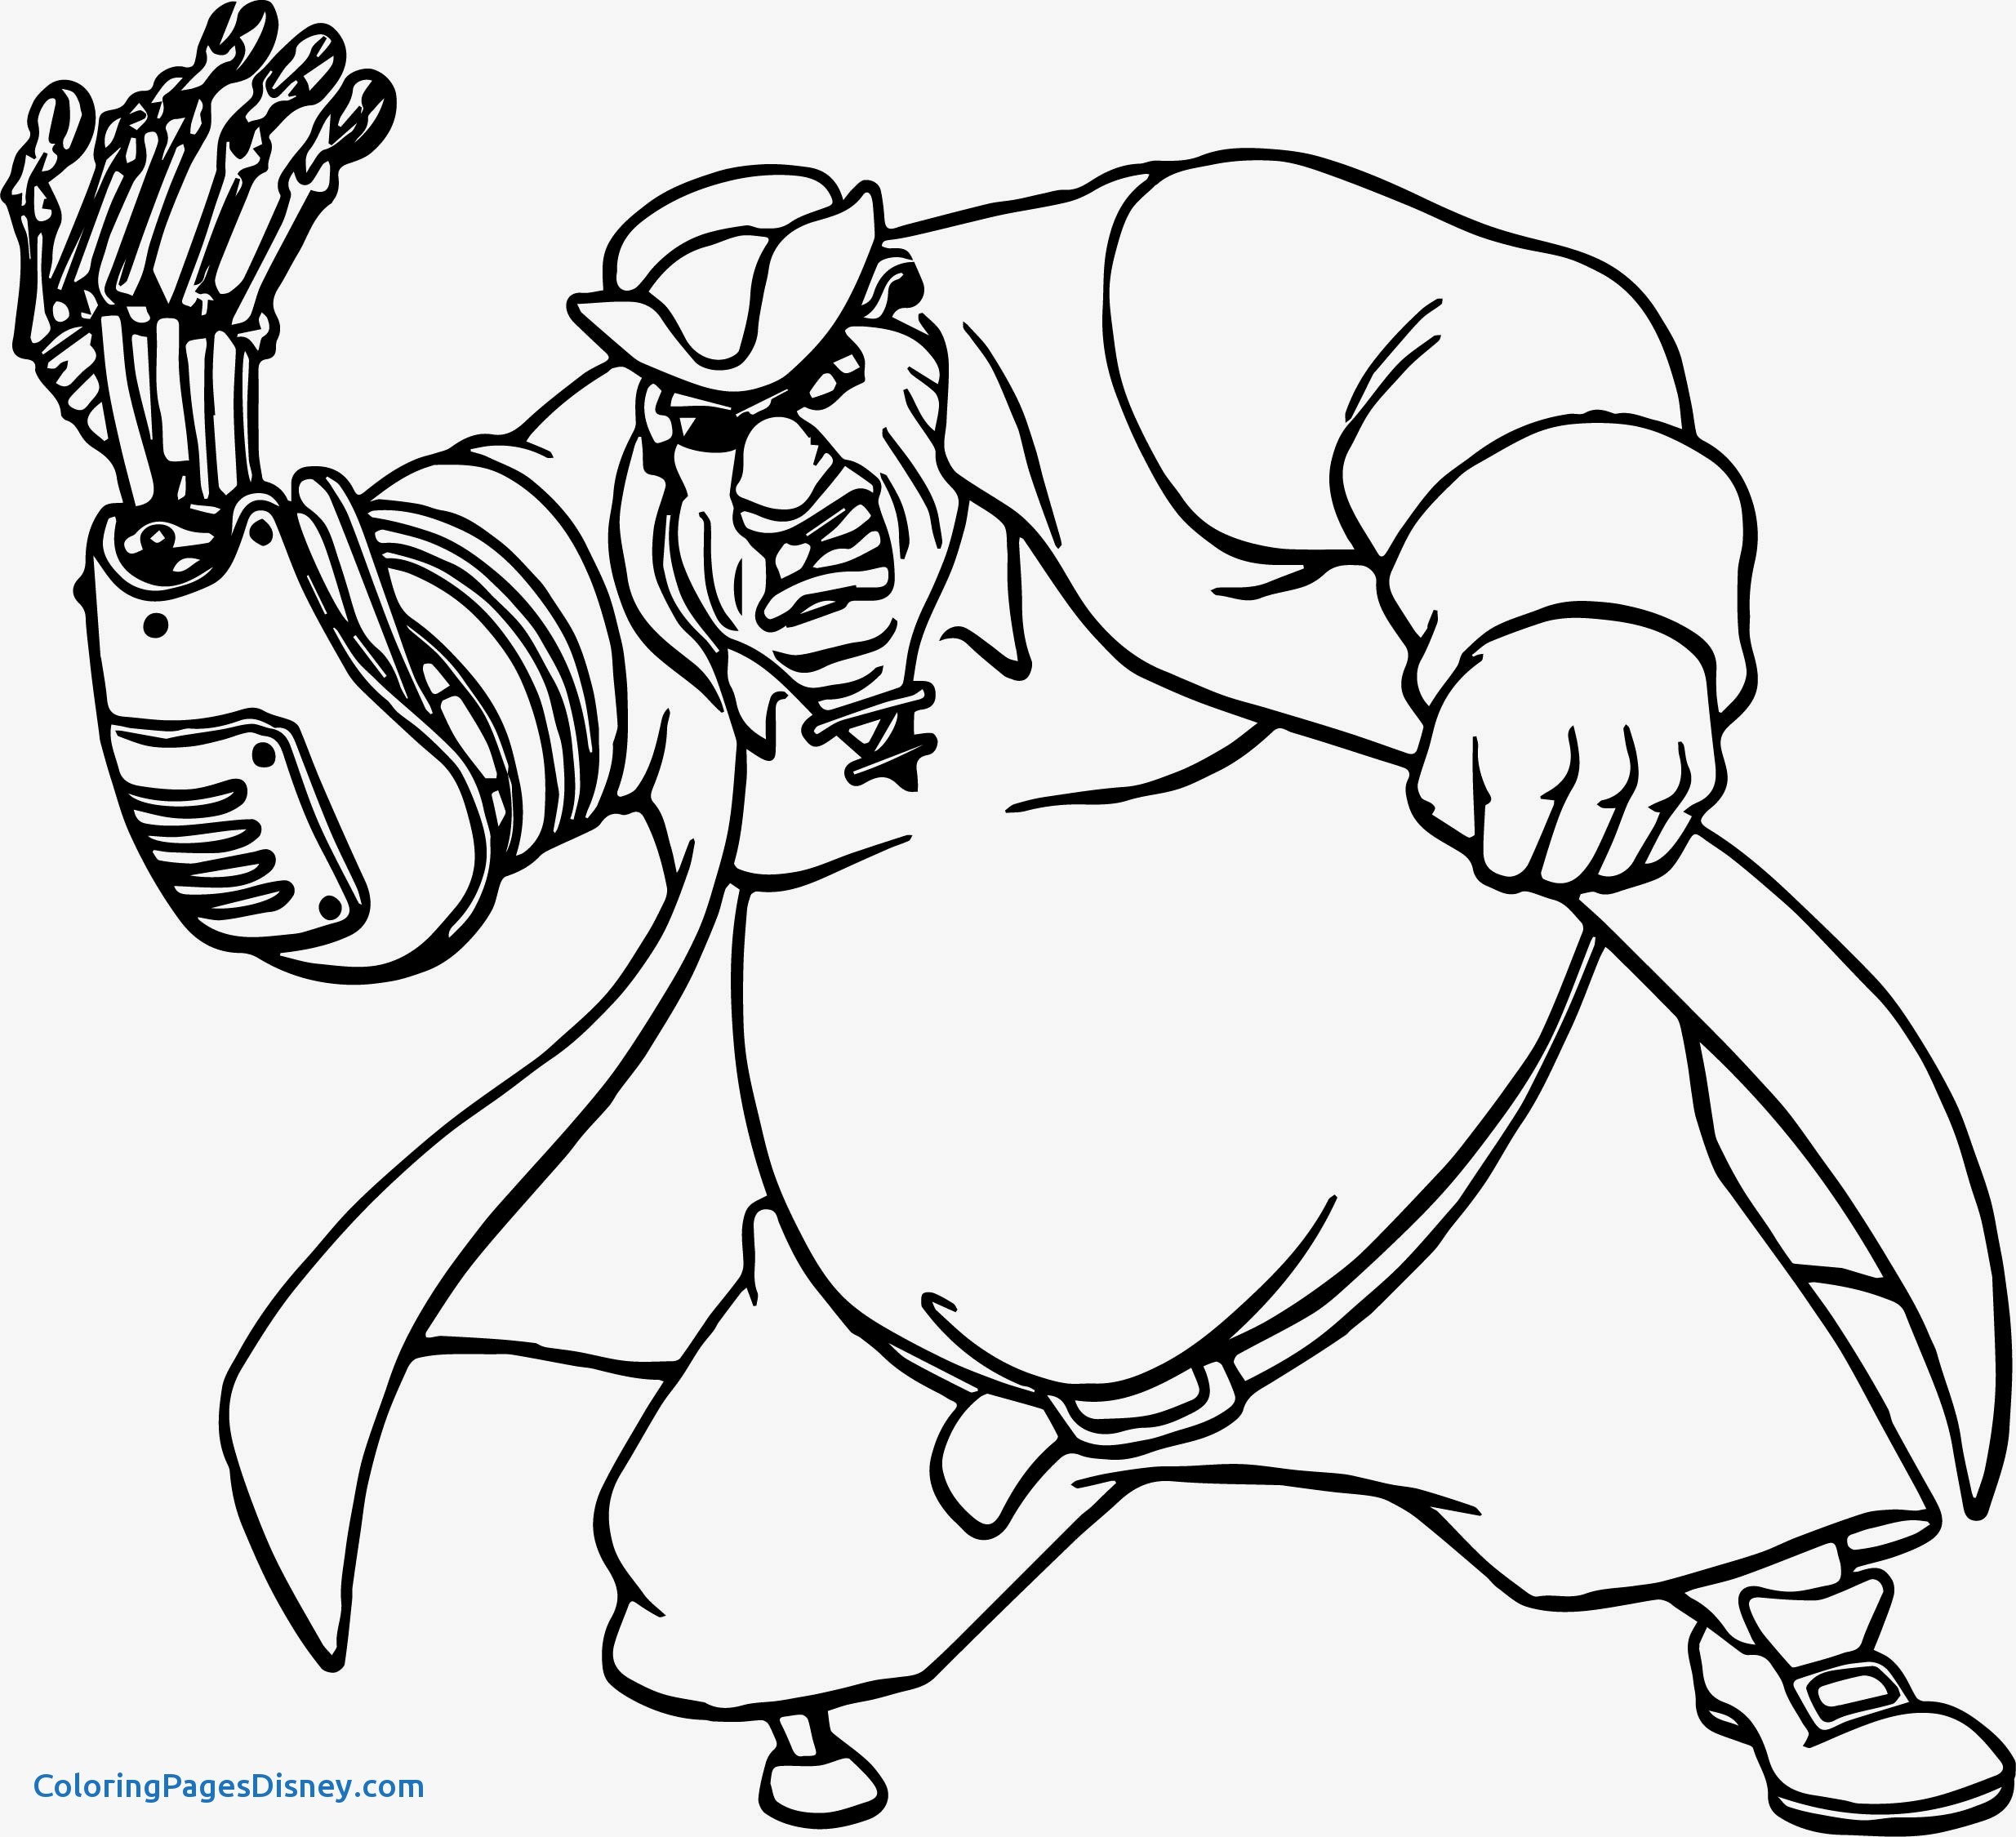 The best free Rugby coloring page images. Download from 70 free